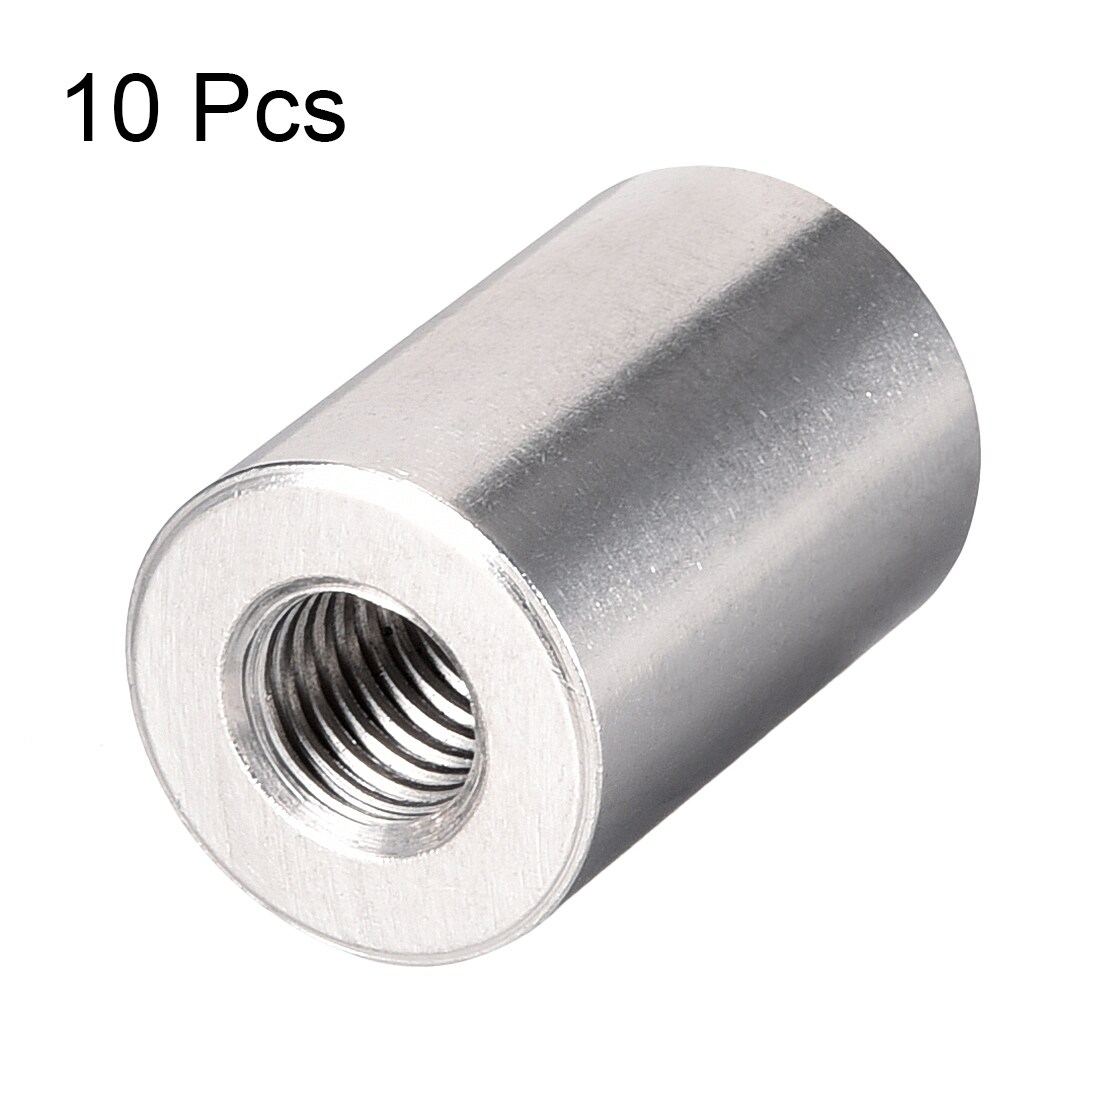 Round Connector Nuts M10x30mm Hgt Sleeve Rod Nut Stainless steel 10Pcs - Silver Tone - M10x30mm(10 pcs)